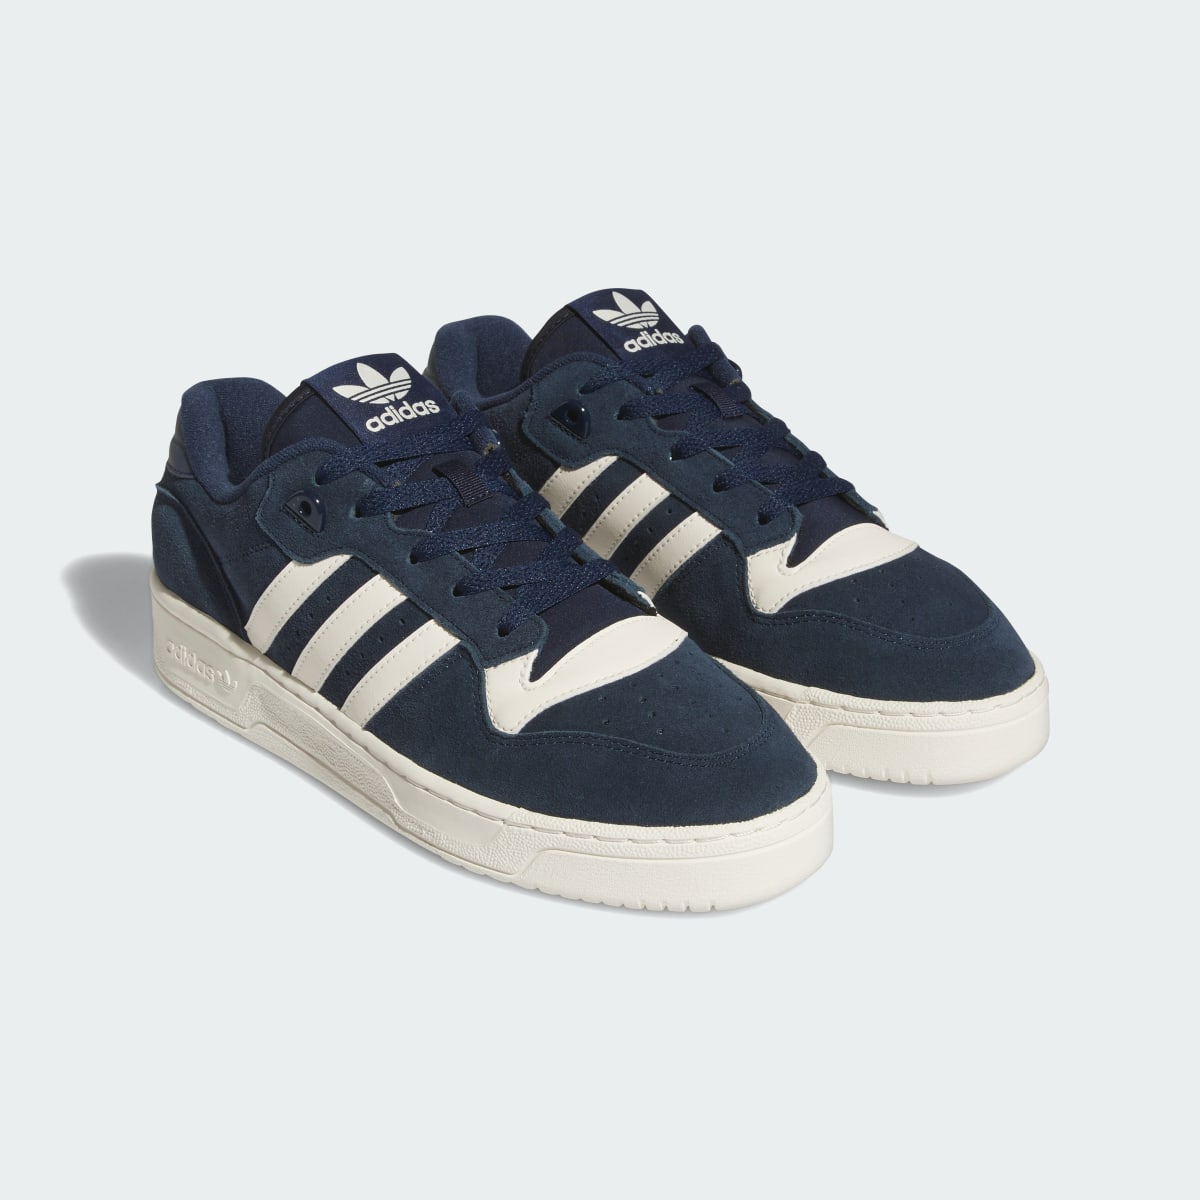 Adidas Rivalry Low Shoes. 5